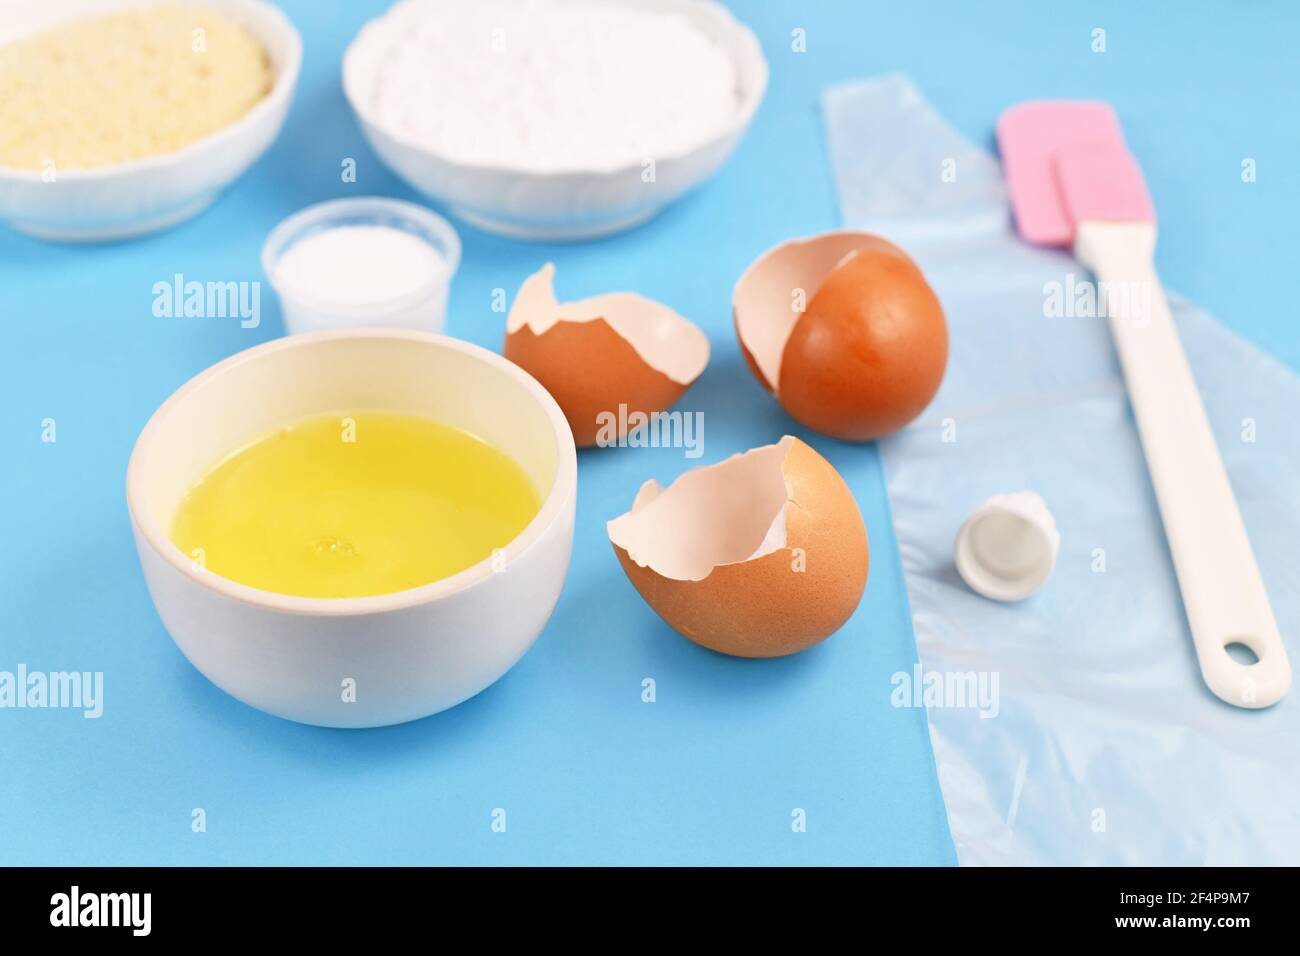 Ingredients for making homemade French Macarons with bowl with egg white next to broken eggshells on blue background Stock Photo